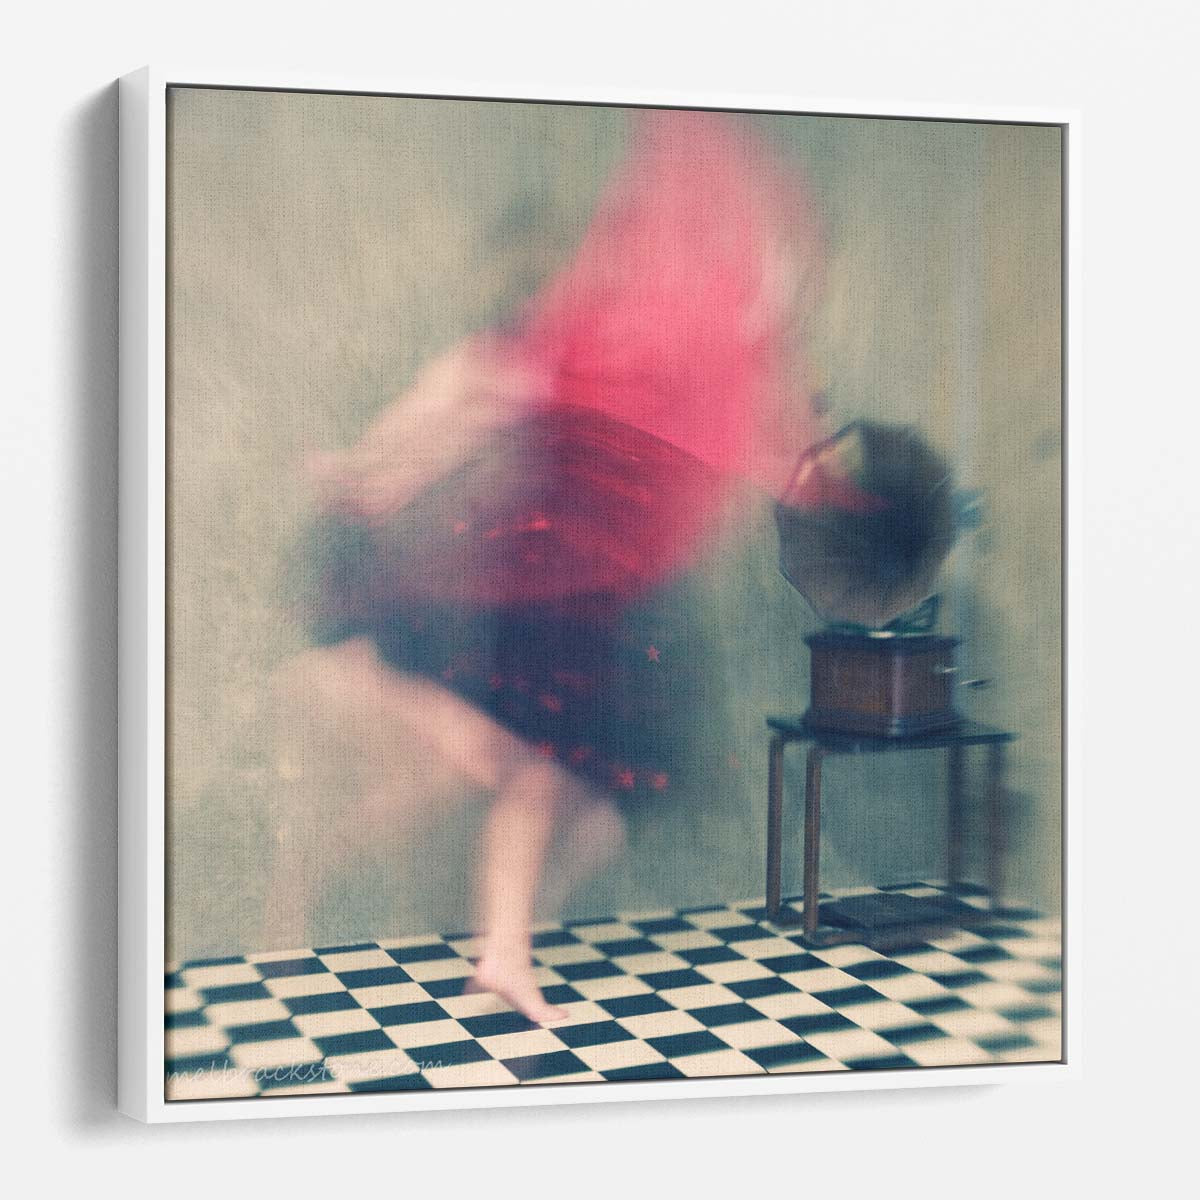 Nostalgic Romance in Motion Vintage Dancing Woman Photography Wall Art by Luxuriance Designs. Made in USA.